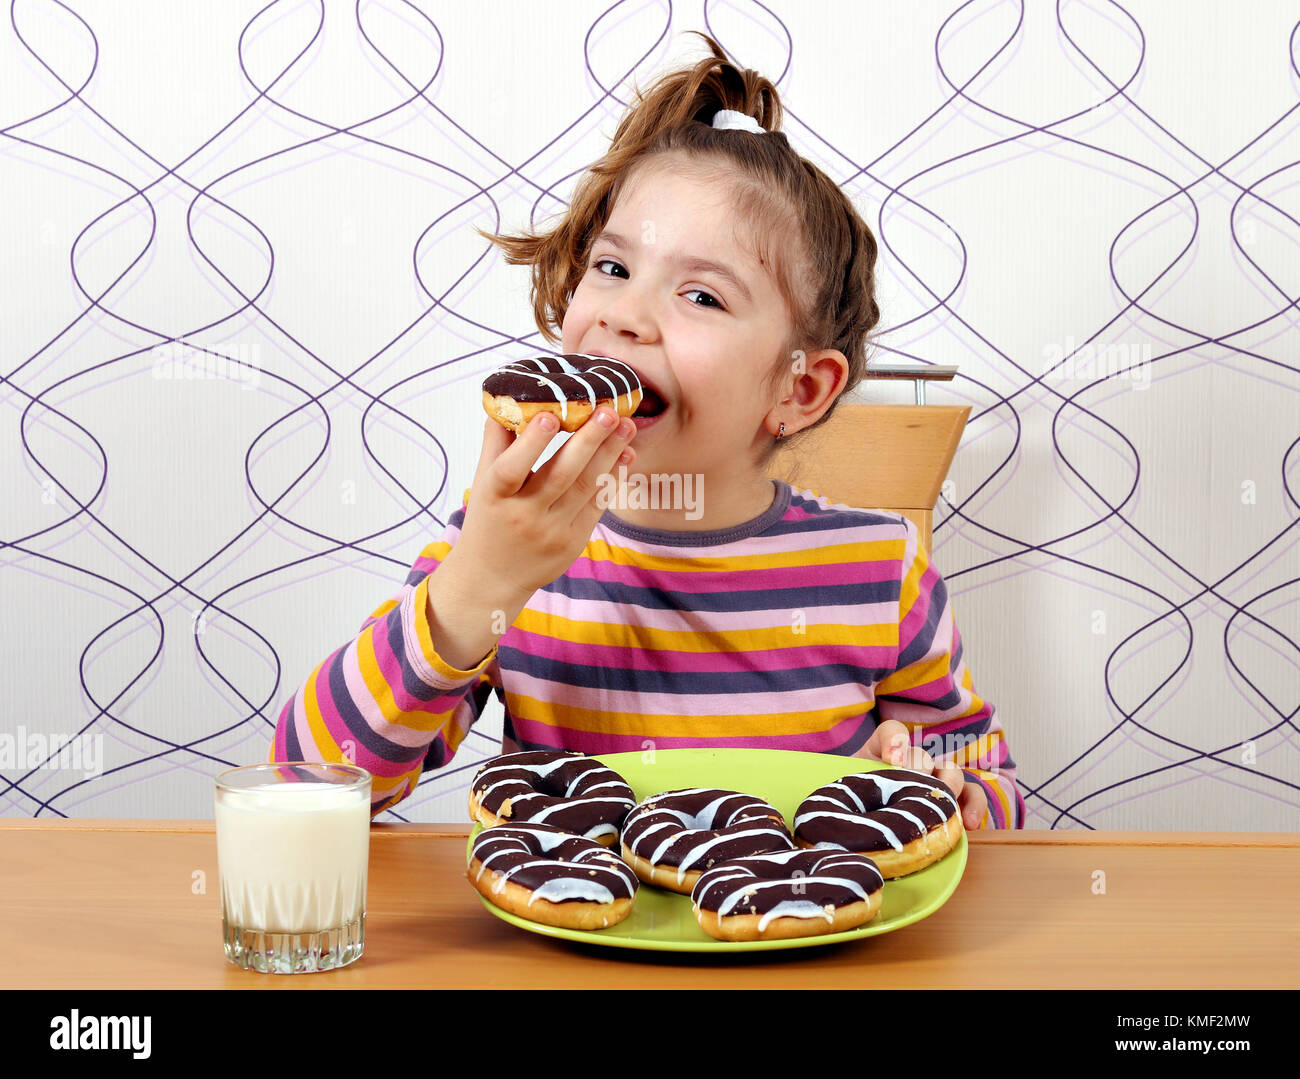 little girl eat chocolate donuts Stock Photo